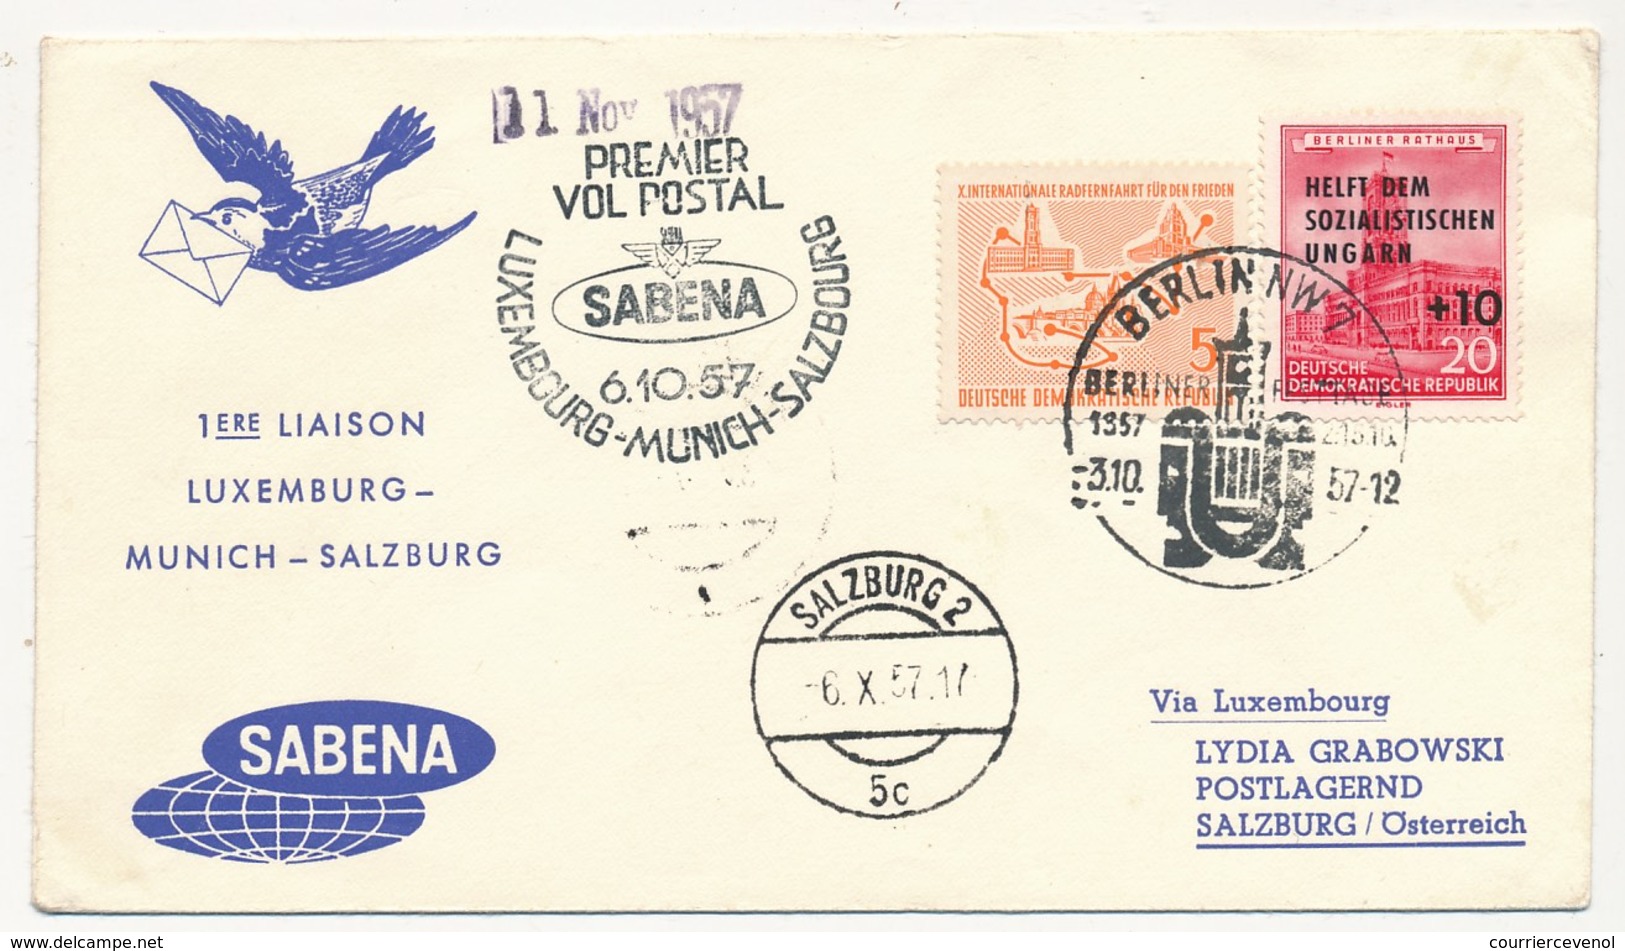 ALLEMAGNE DDR - 1er Vol Postal SABENA - LUXEMBOURG-MUNICH-SALZBOURG - 6.10.1957 - Covers & Documents